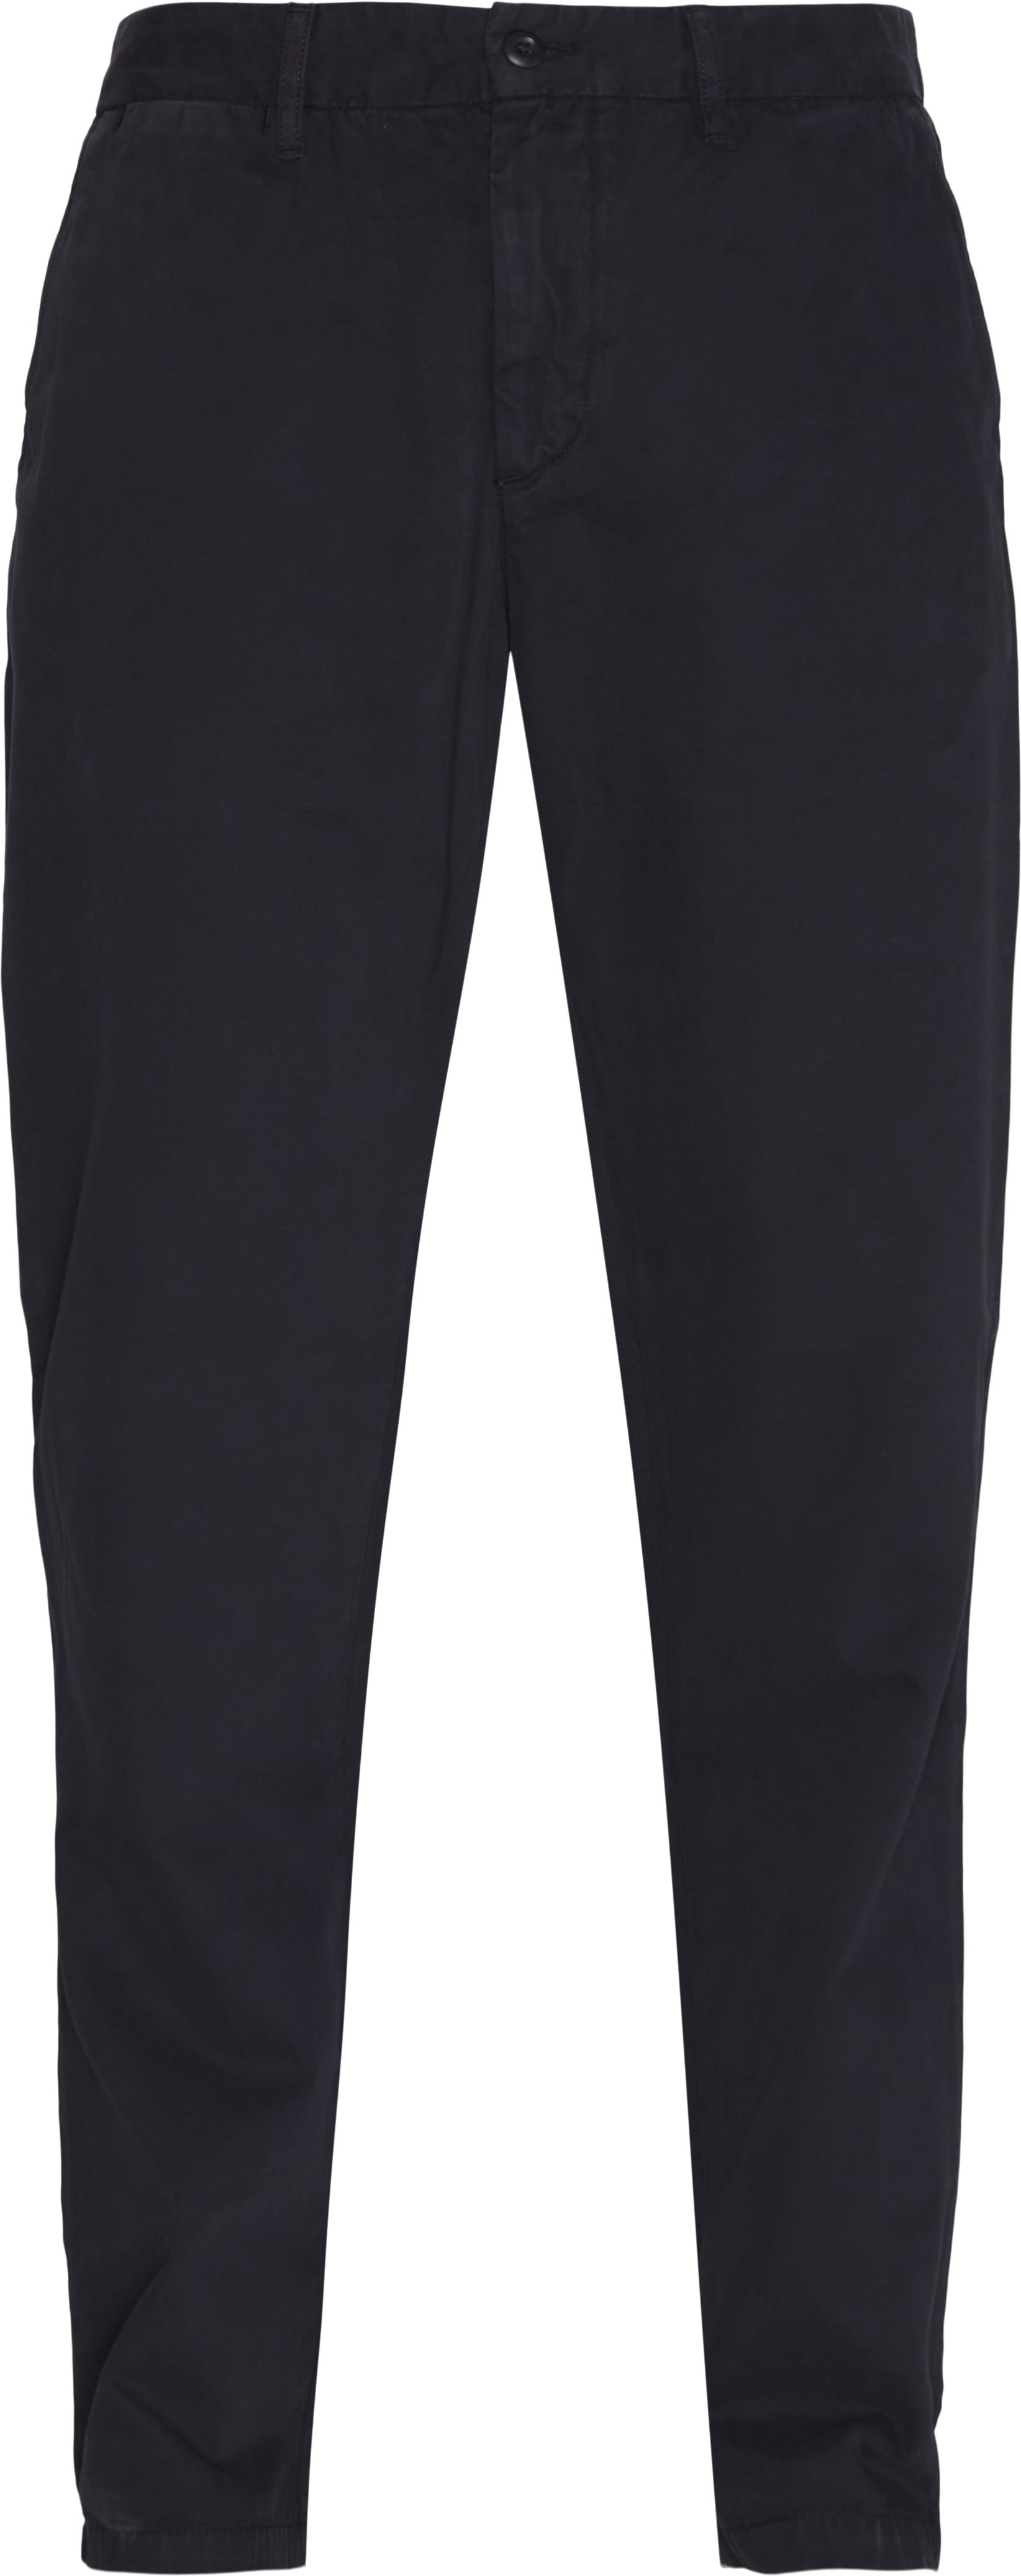 Johnson Chinos - Trousers - Regular fit - Blue